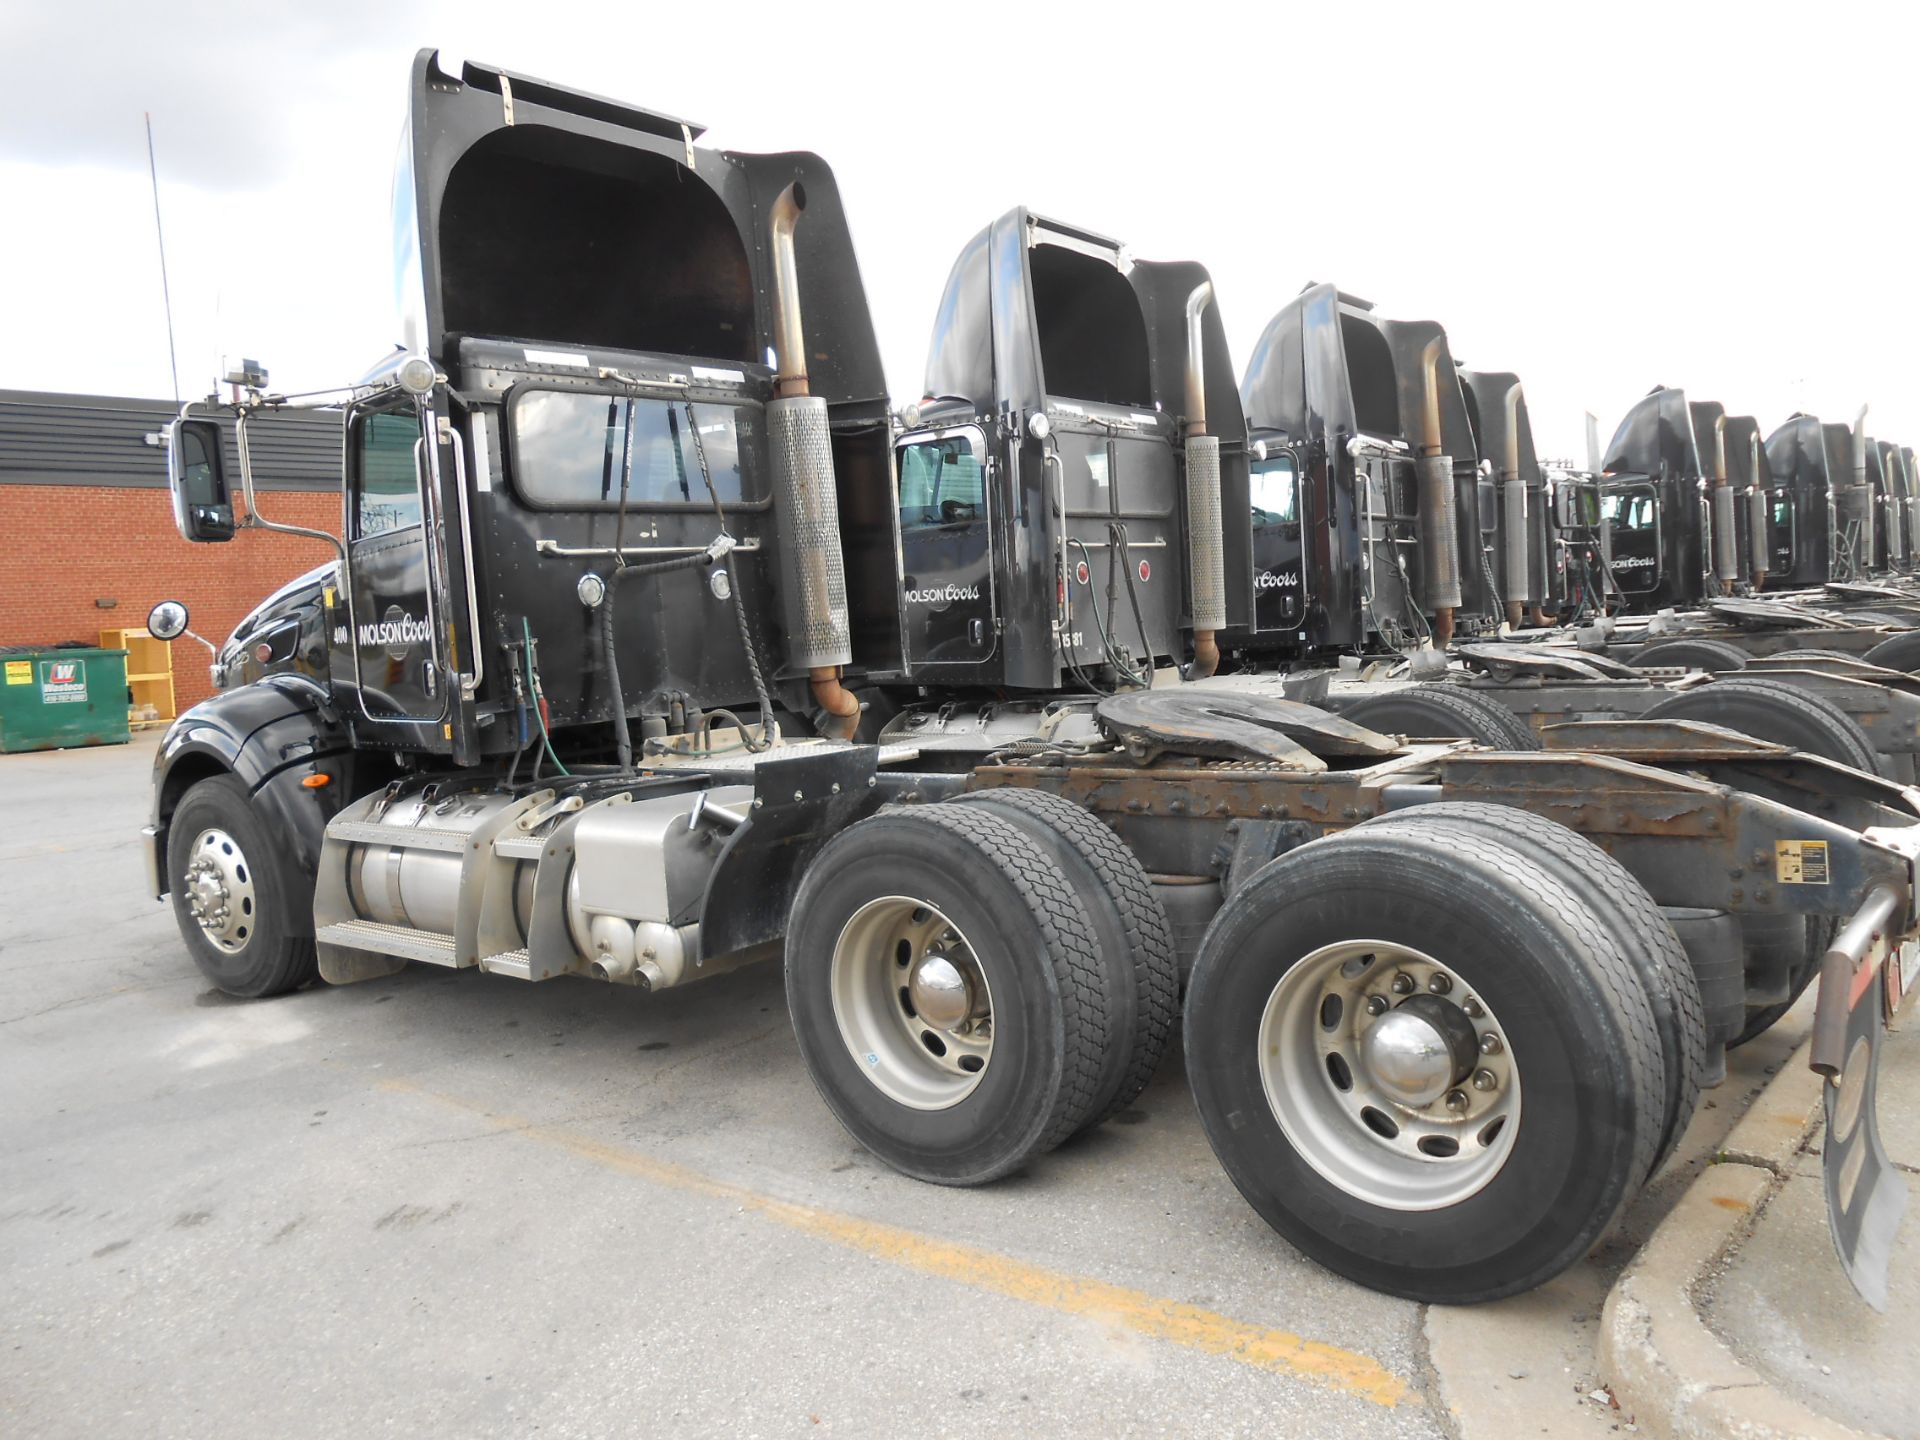 2011 Peterbilt 6X4 DAY CAB TRUCK, model 386 chassis 8070 kg weight with Cummins ISX15 485 diesel ( - Image 7 of 14